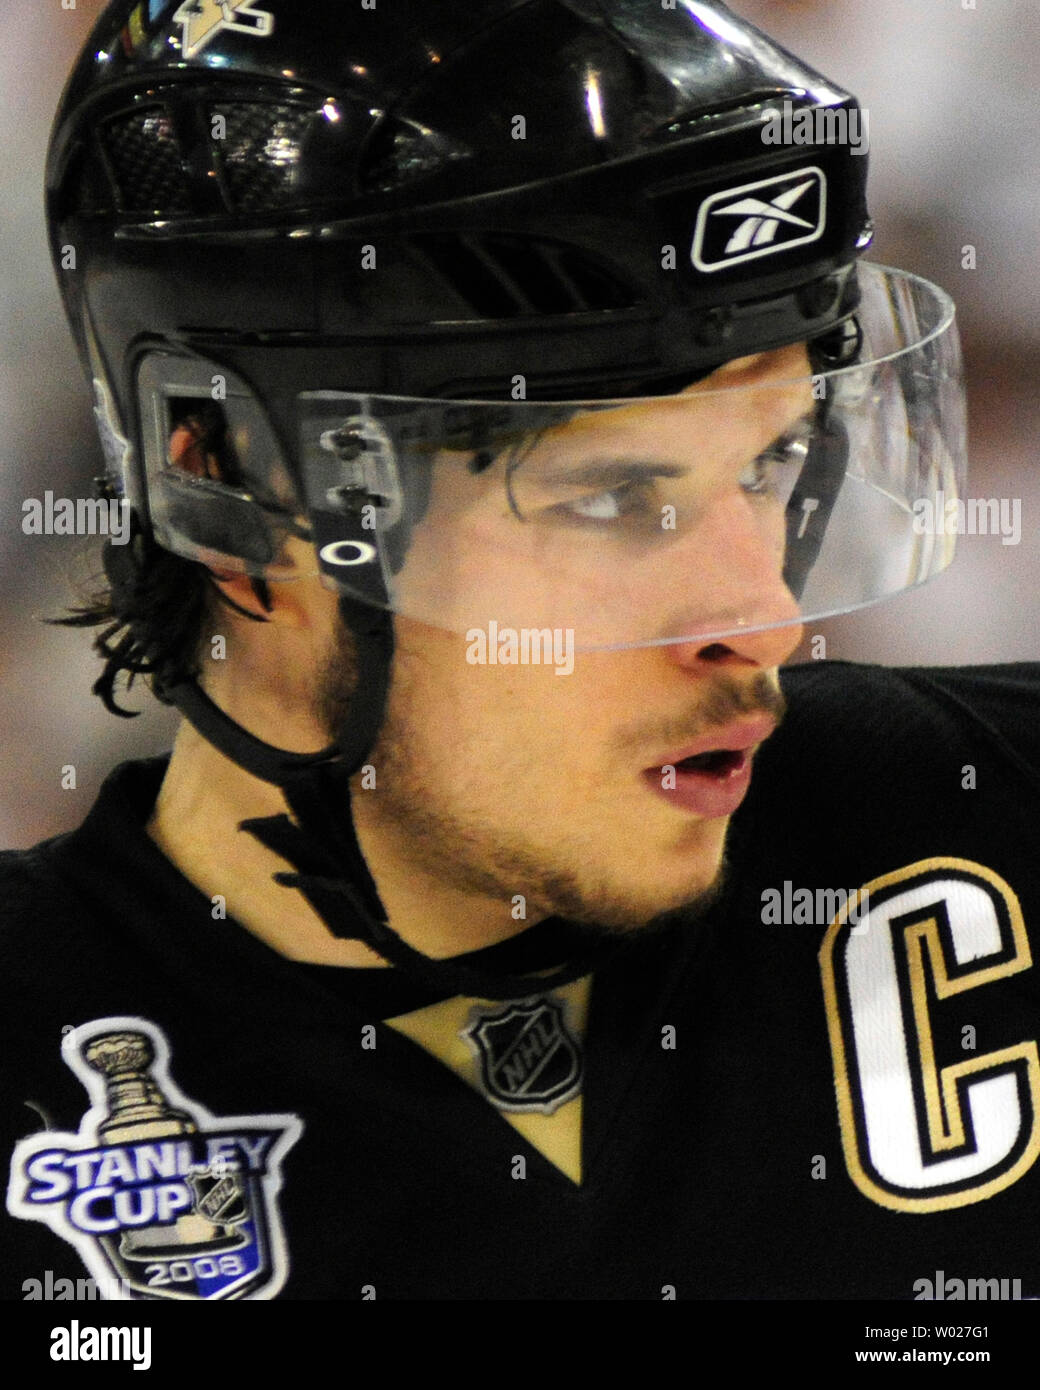 Peter Diana on X: Pittsburgh Penguins' Sidney Crosby, right